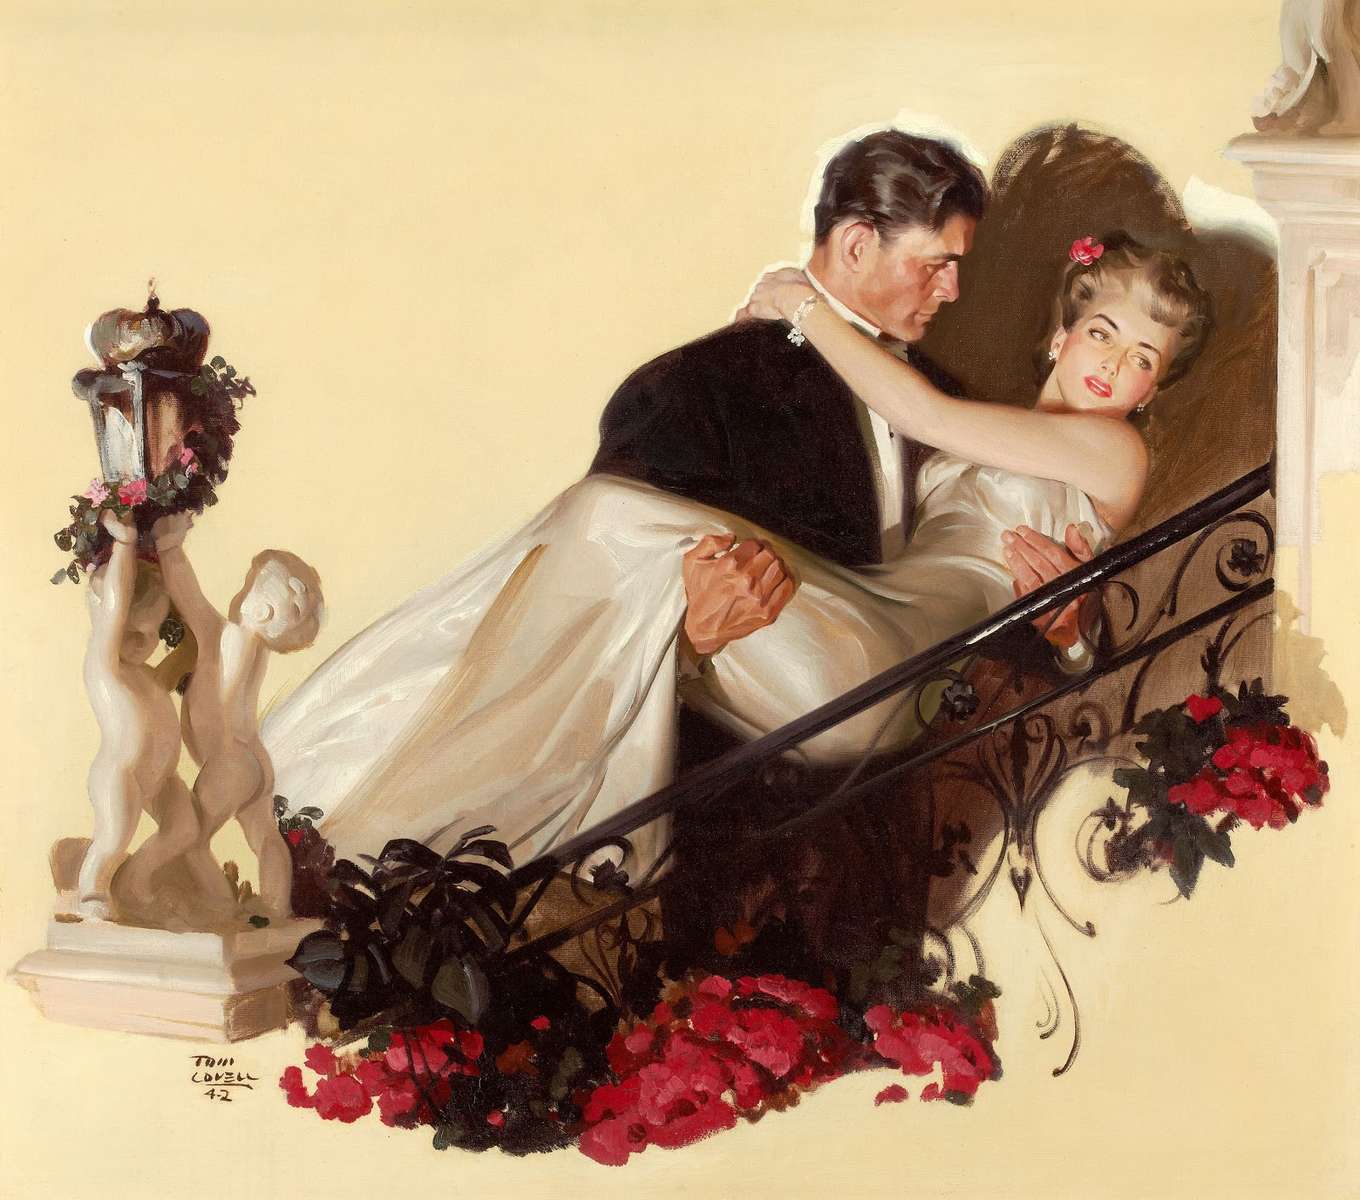 Tom Lovell "Up the Staircase (1942) " puzzle en ligne